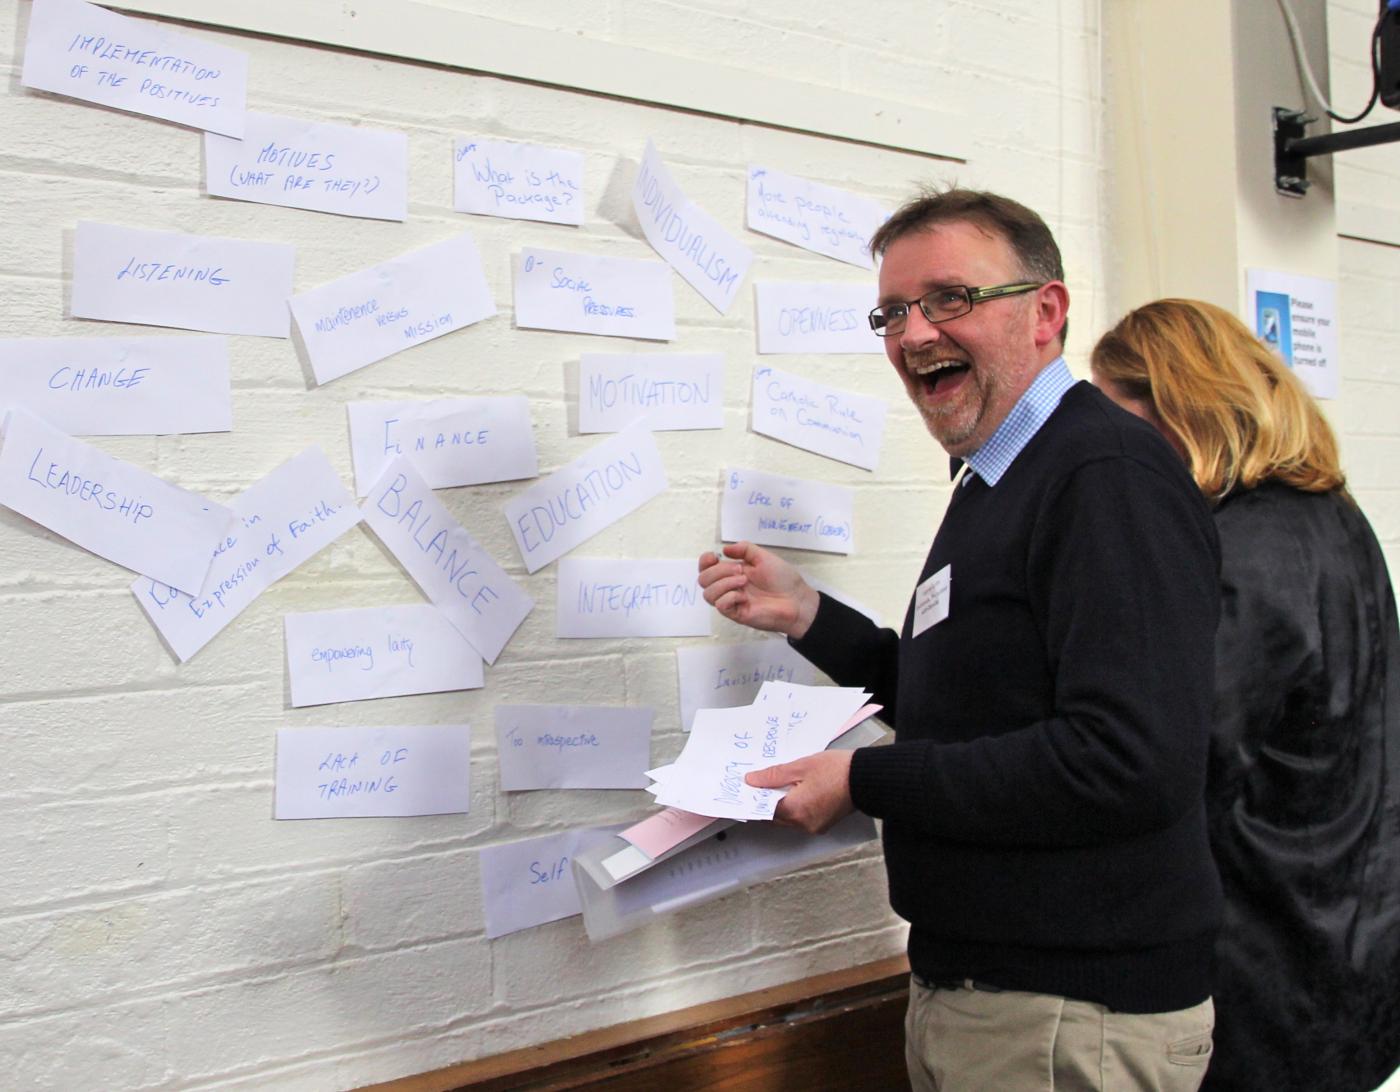 Rev. Eugene Griffin has a moment of joy at a collage wall during a "Come&C" day in Dublin and Glendalough, Ireland. © Lynn Glanville